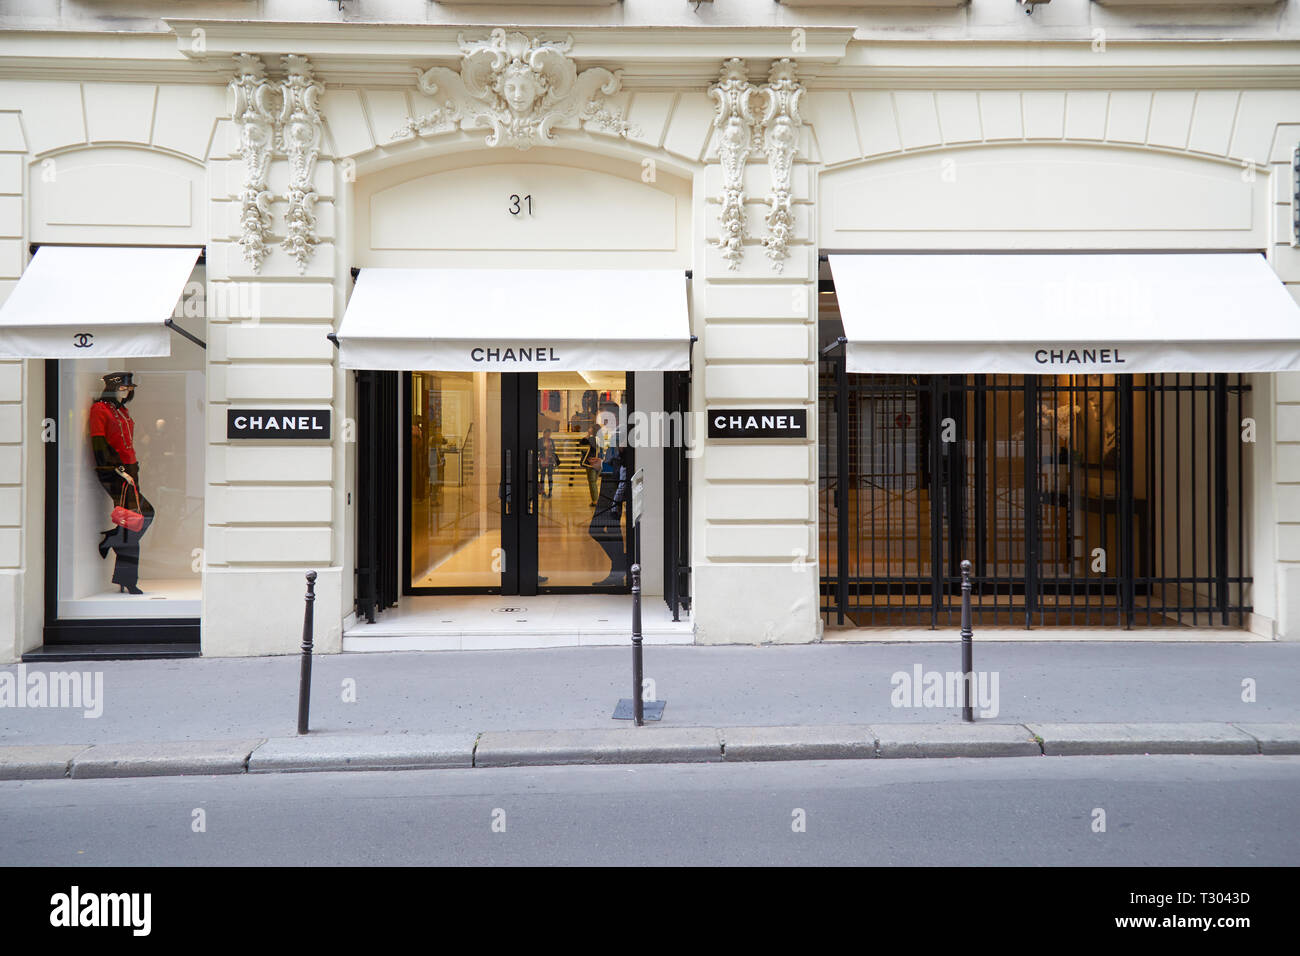 PARIS, FRANCE - JULY 22, 2017: Chanel fashion luxury store in Paris, France. Stock Photo